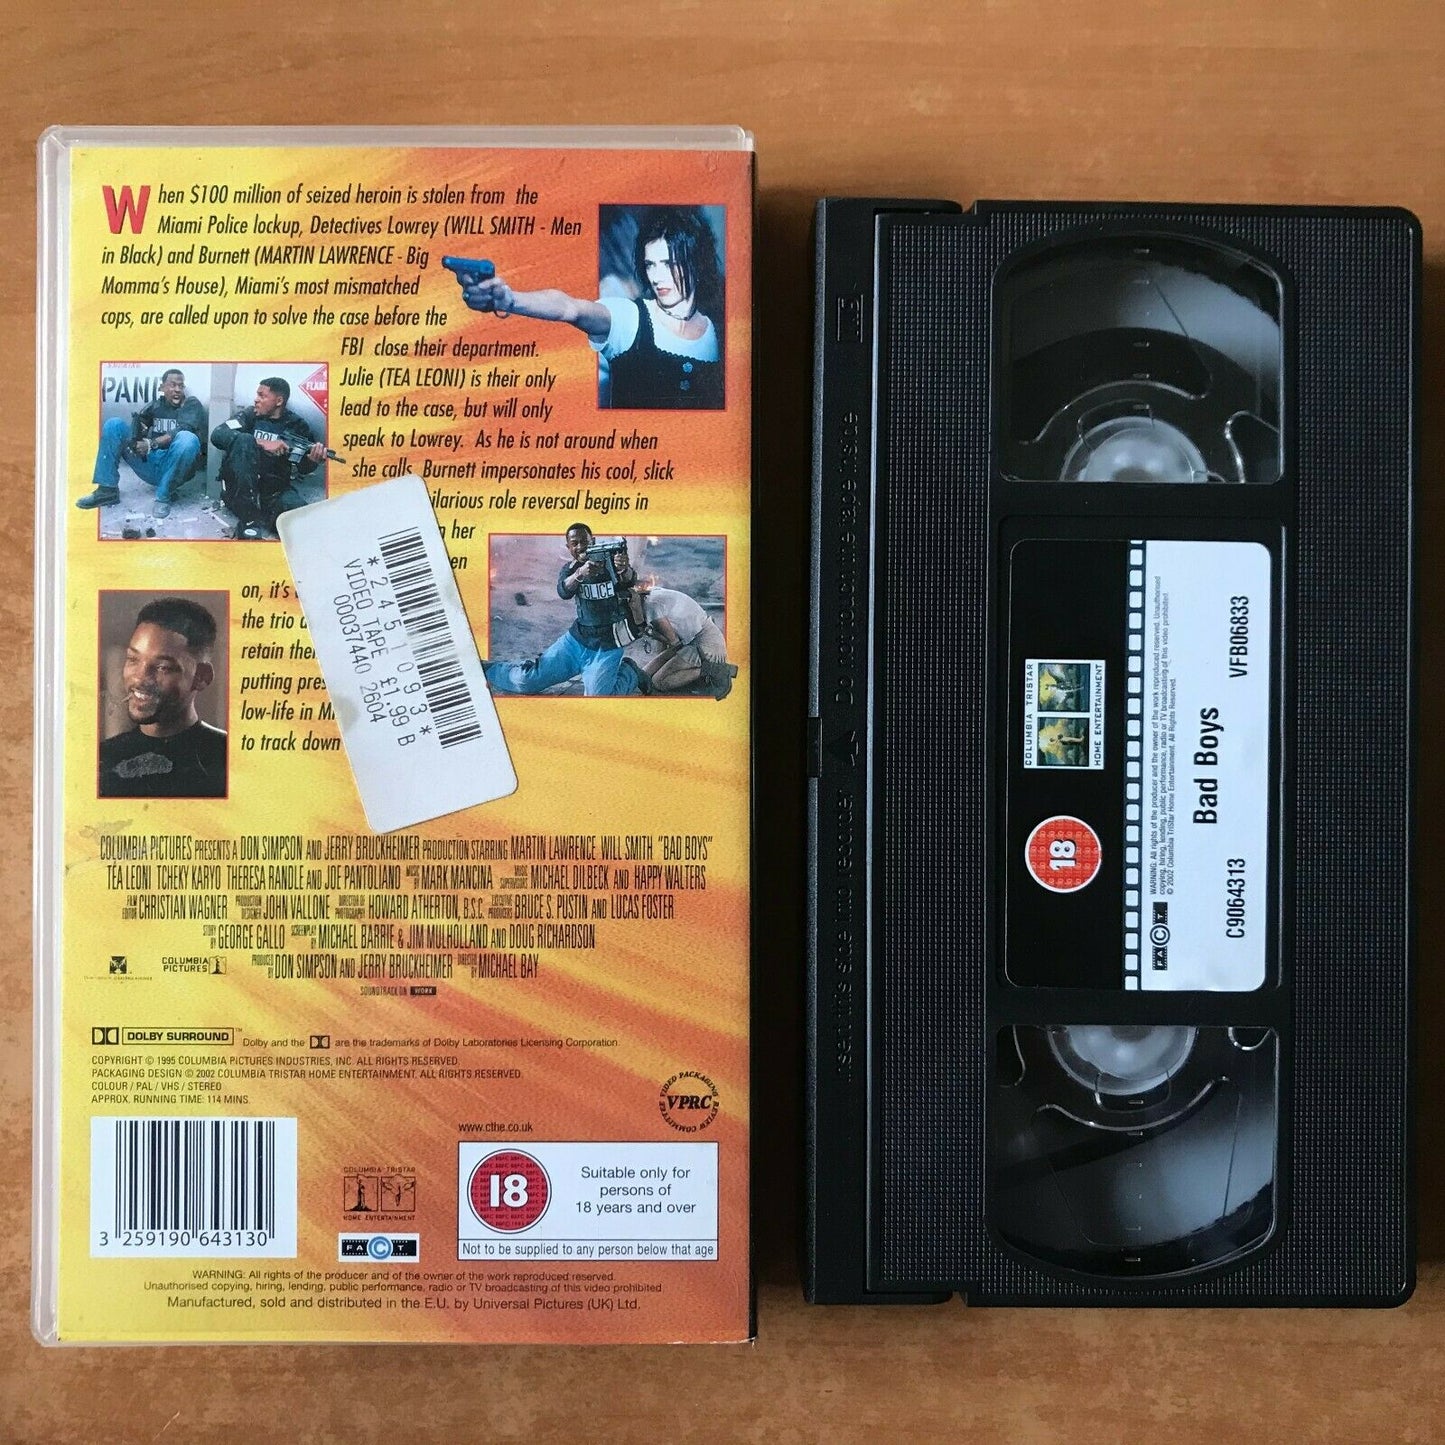 Bad Boys; [Michael Bay]: Explosive Action - Will Smith / Martin Lawrence - VHS-